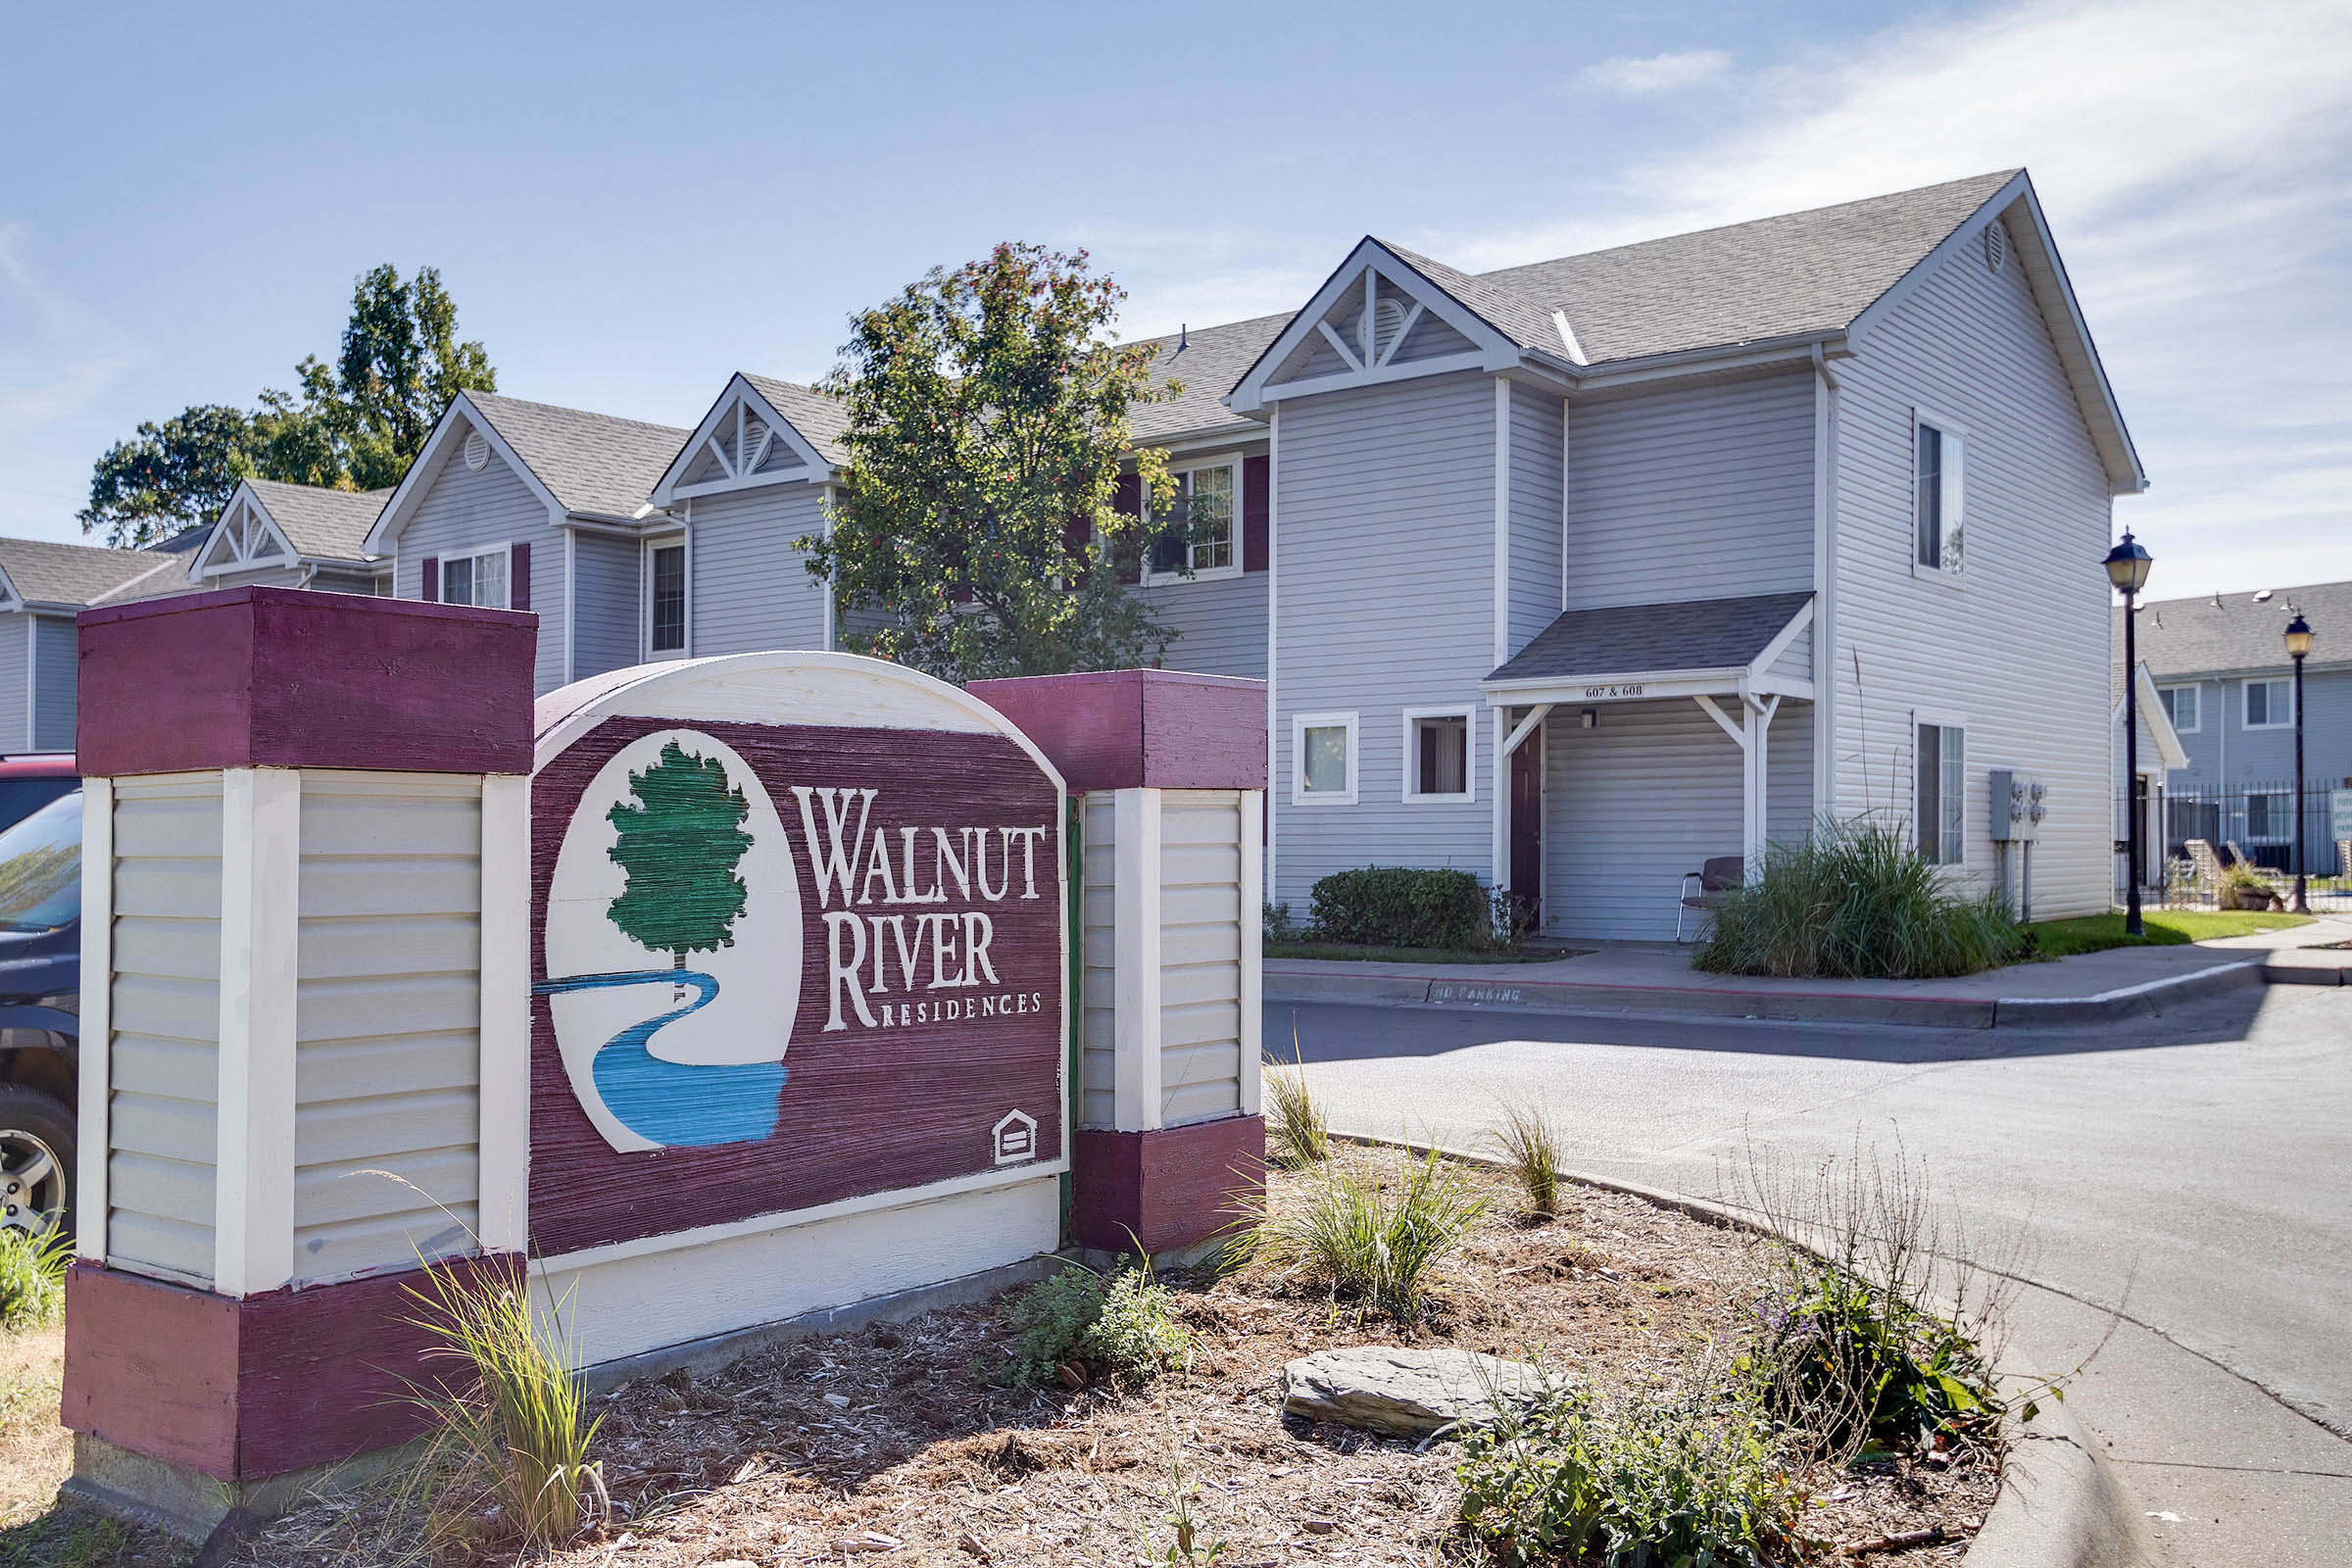 Walnut River Residences - Monument Sign